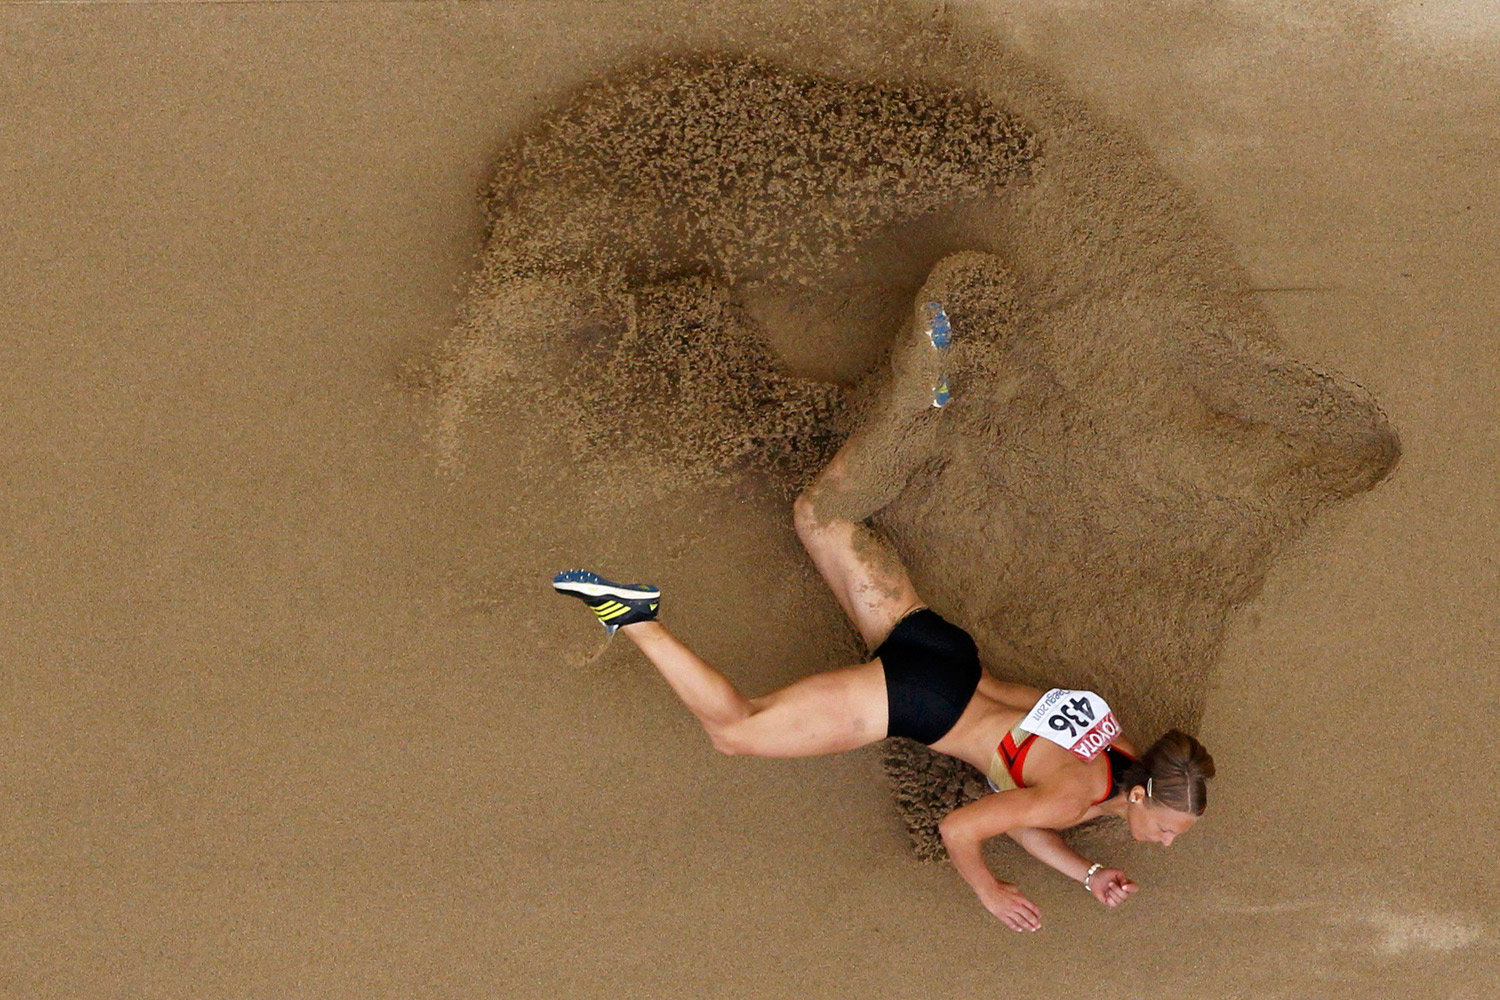 Jennifer Oeser of Germany competes during the long jump event of the heptathlon at the IAAF World Championships in Daegu, South Korea, August 30, 2011.